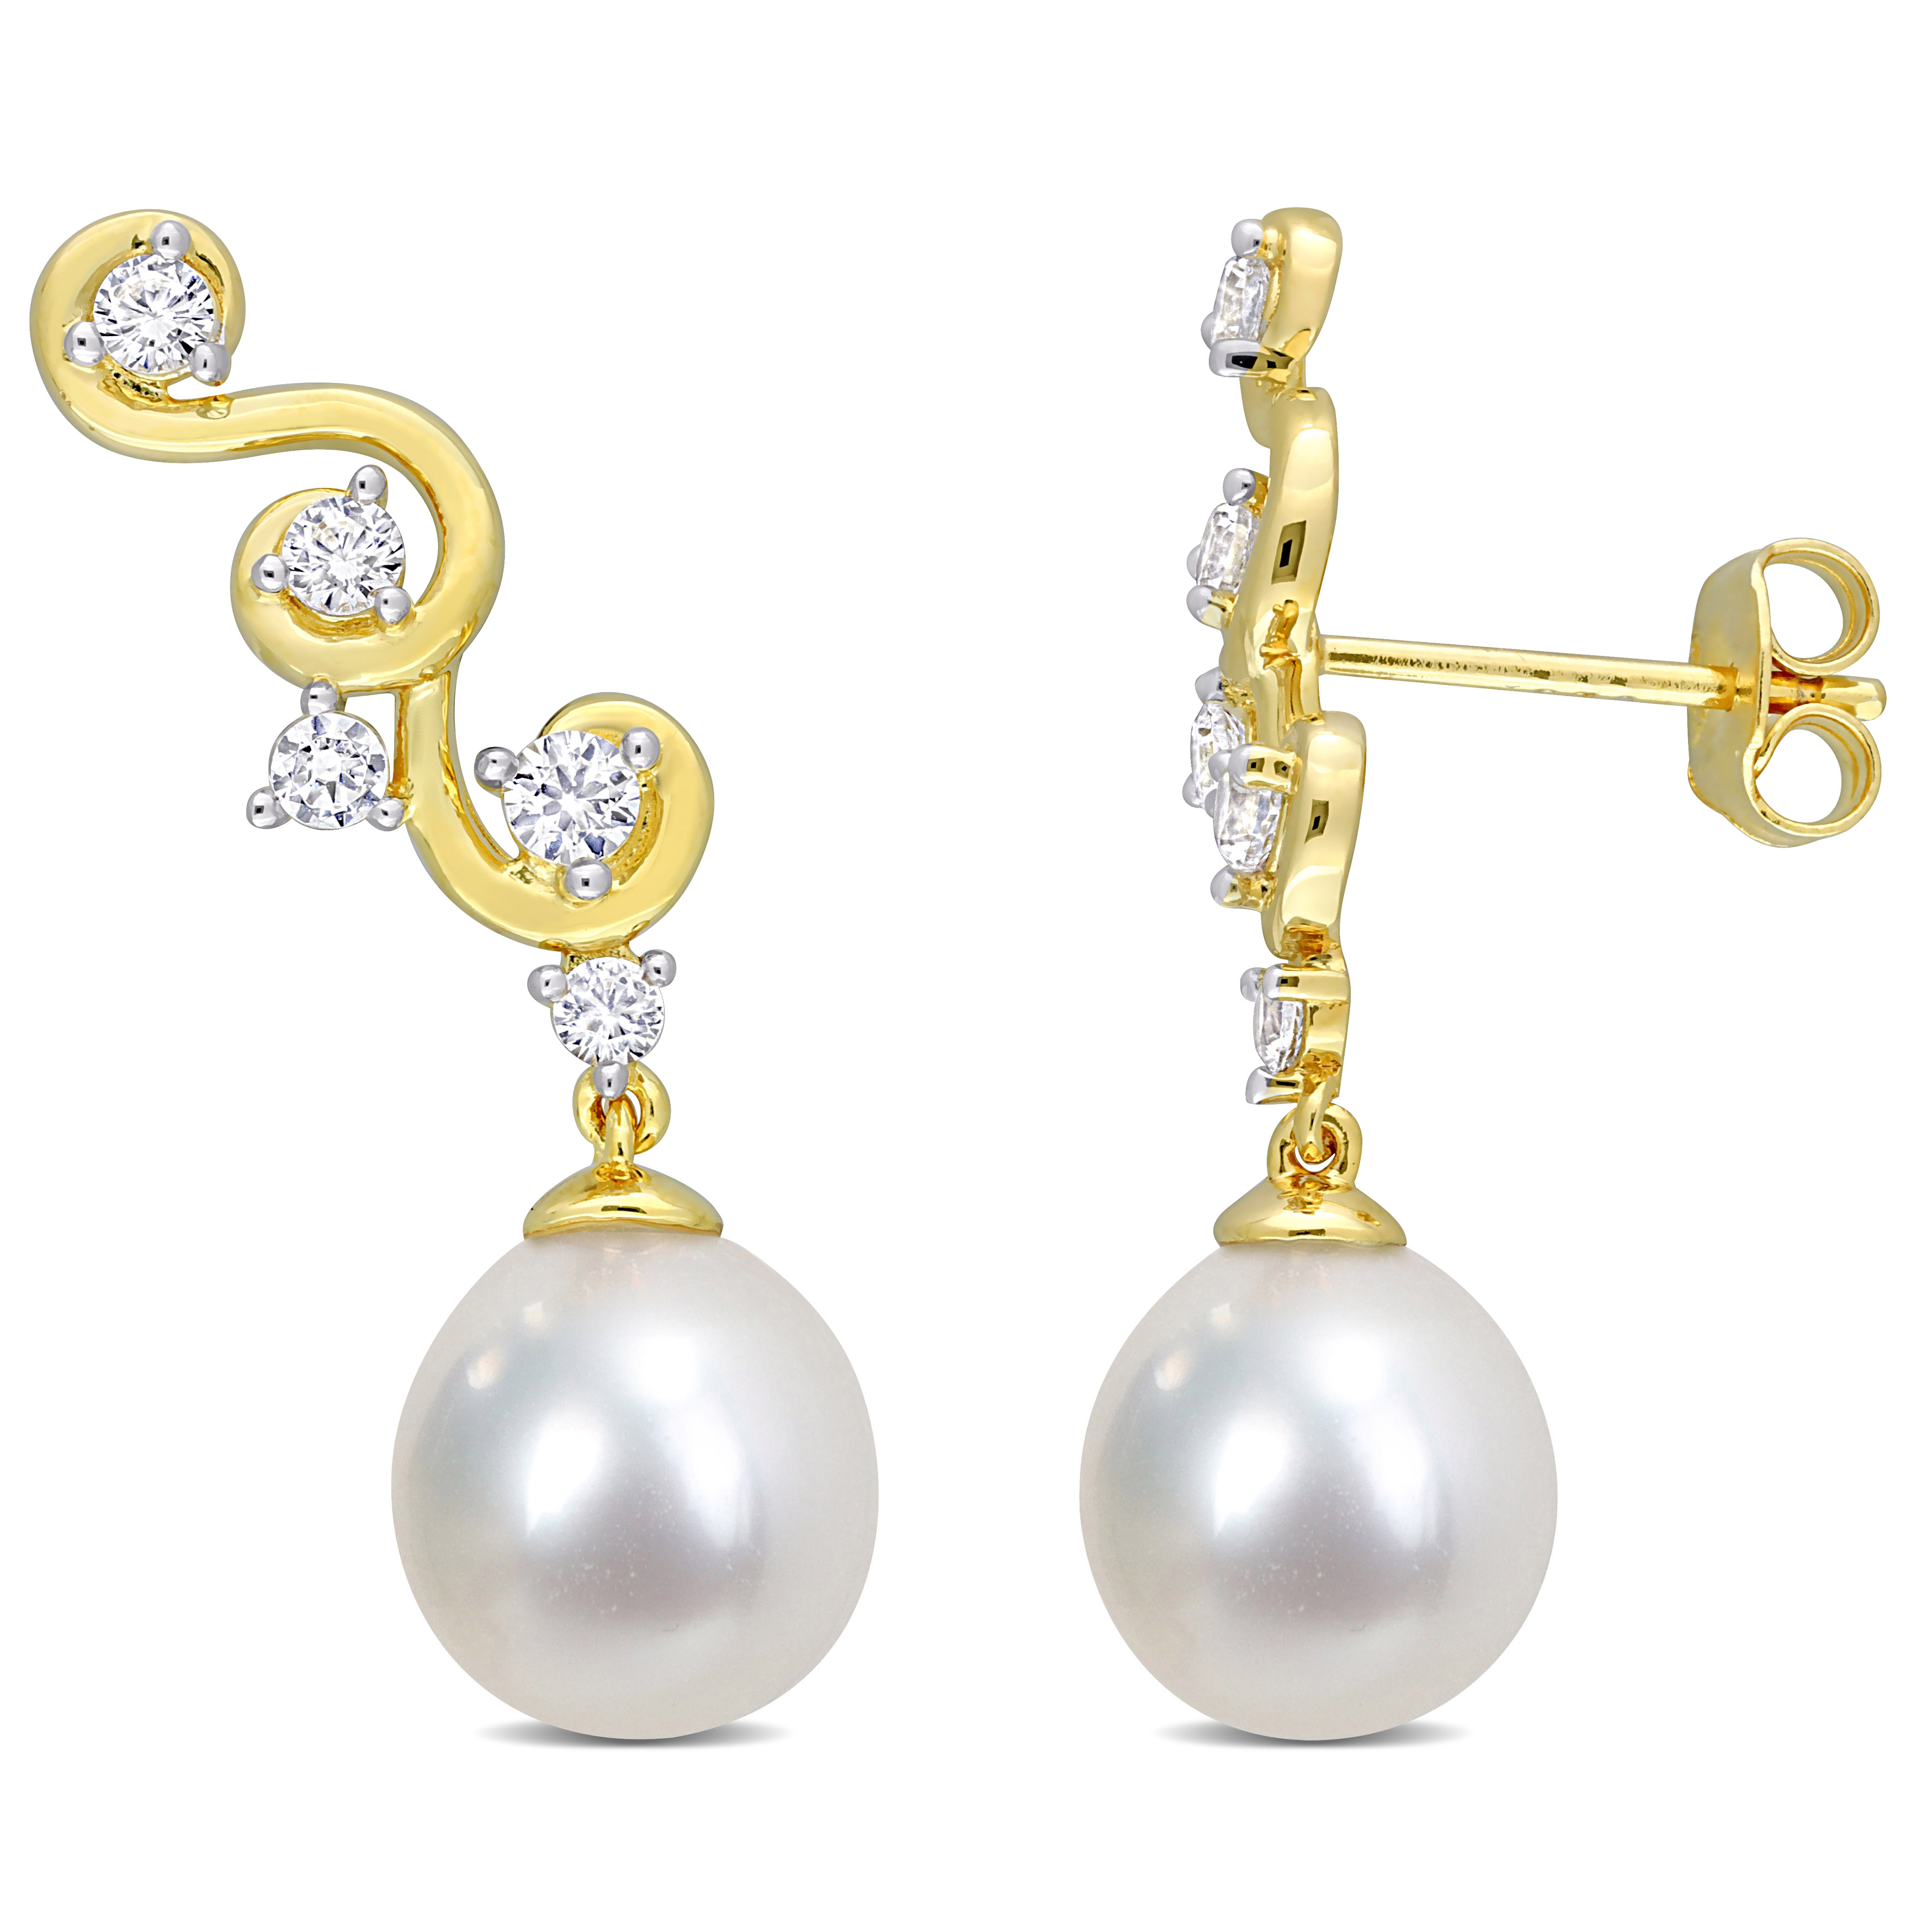 8 - 9 MM South Sea Cultured Pearl and 5/8 CT TGW Created White Sapphire Infinity Drop Earrings in Yellow Plated Sterling Silver